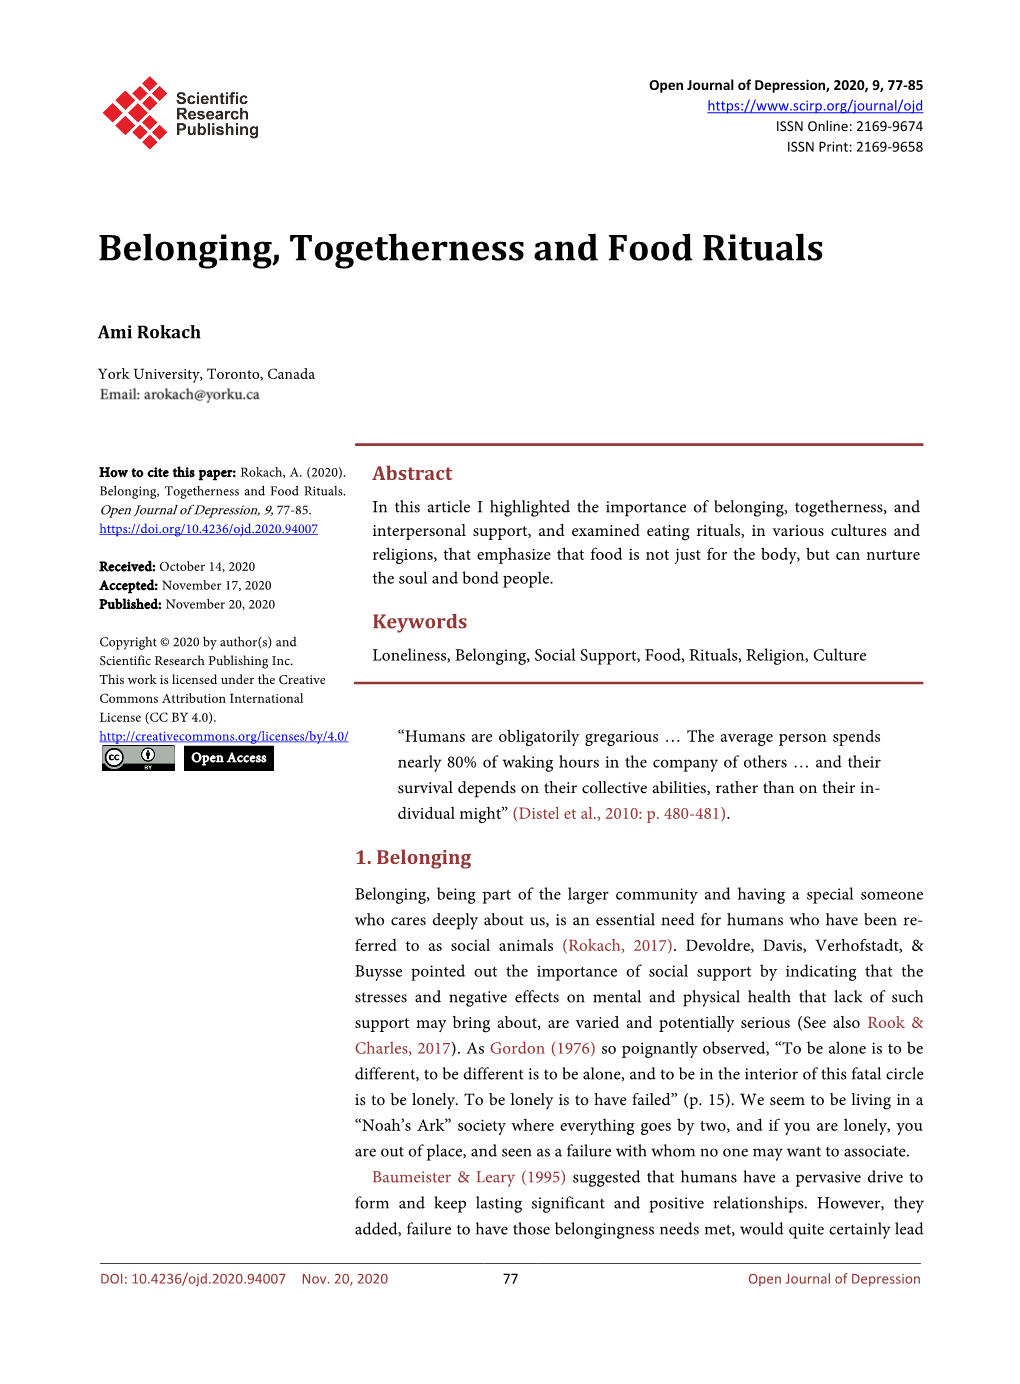 Belonging, Togetherness and Food Rituals